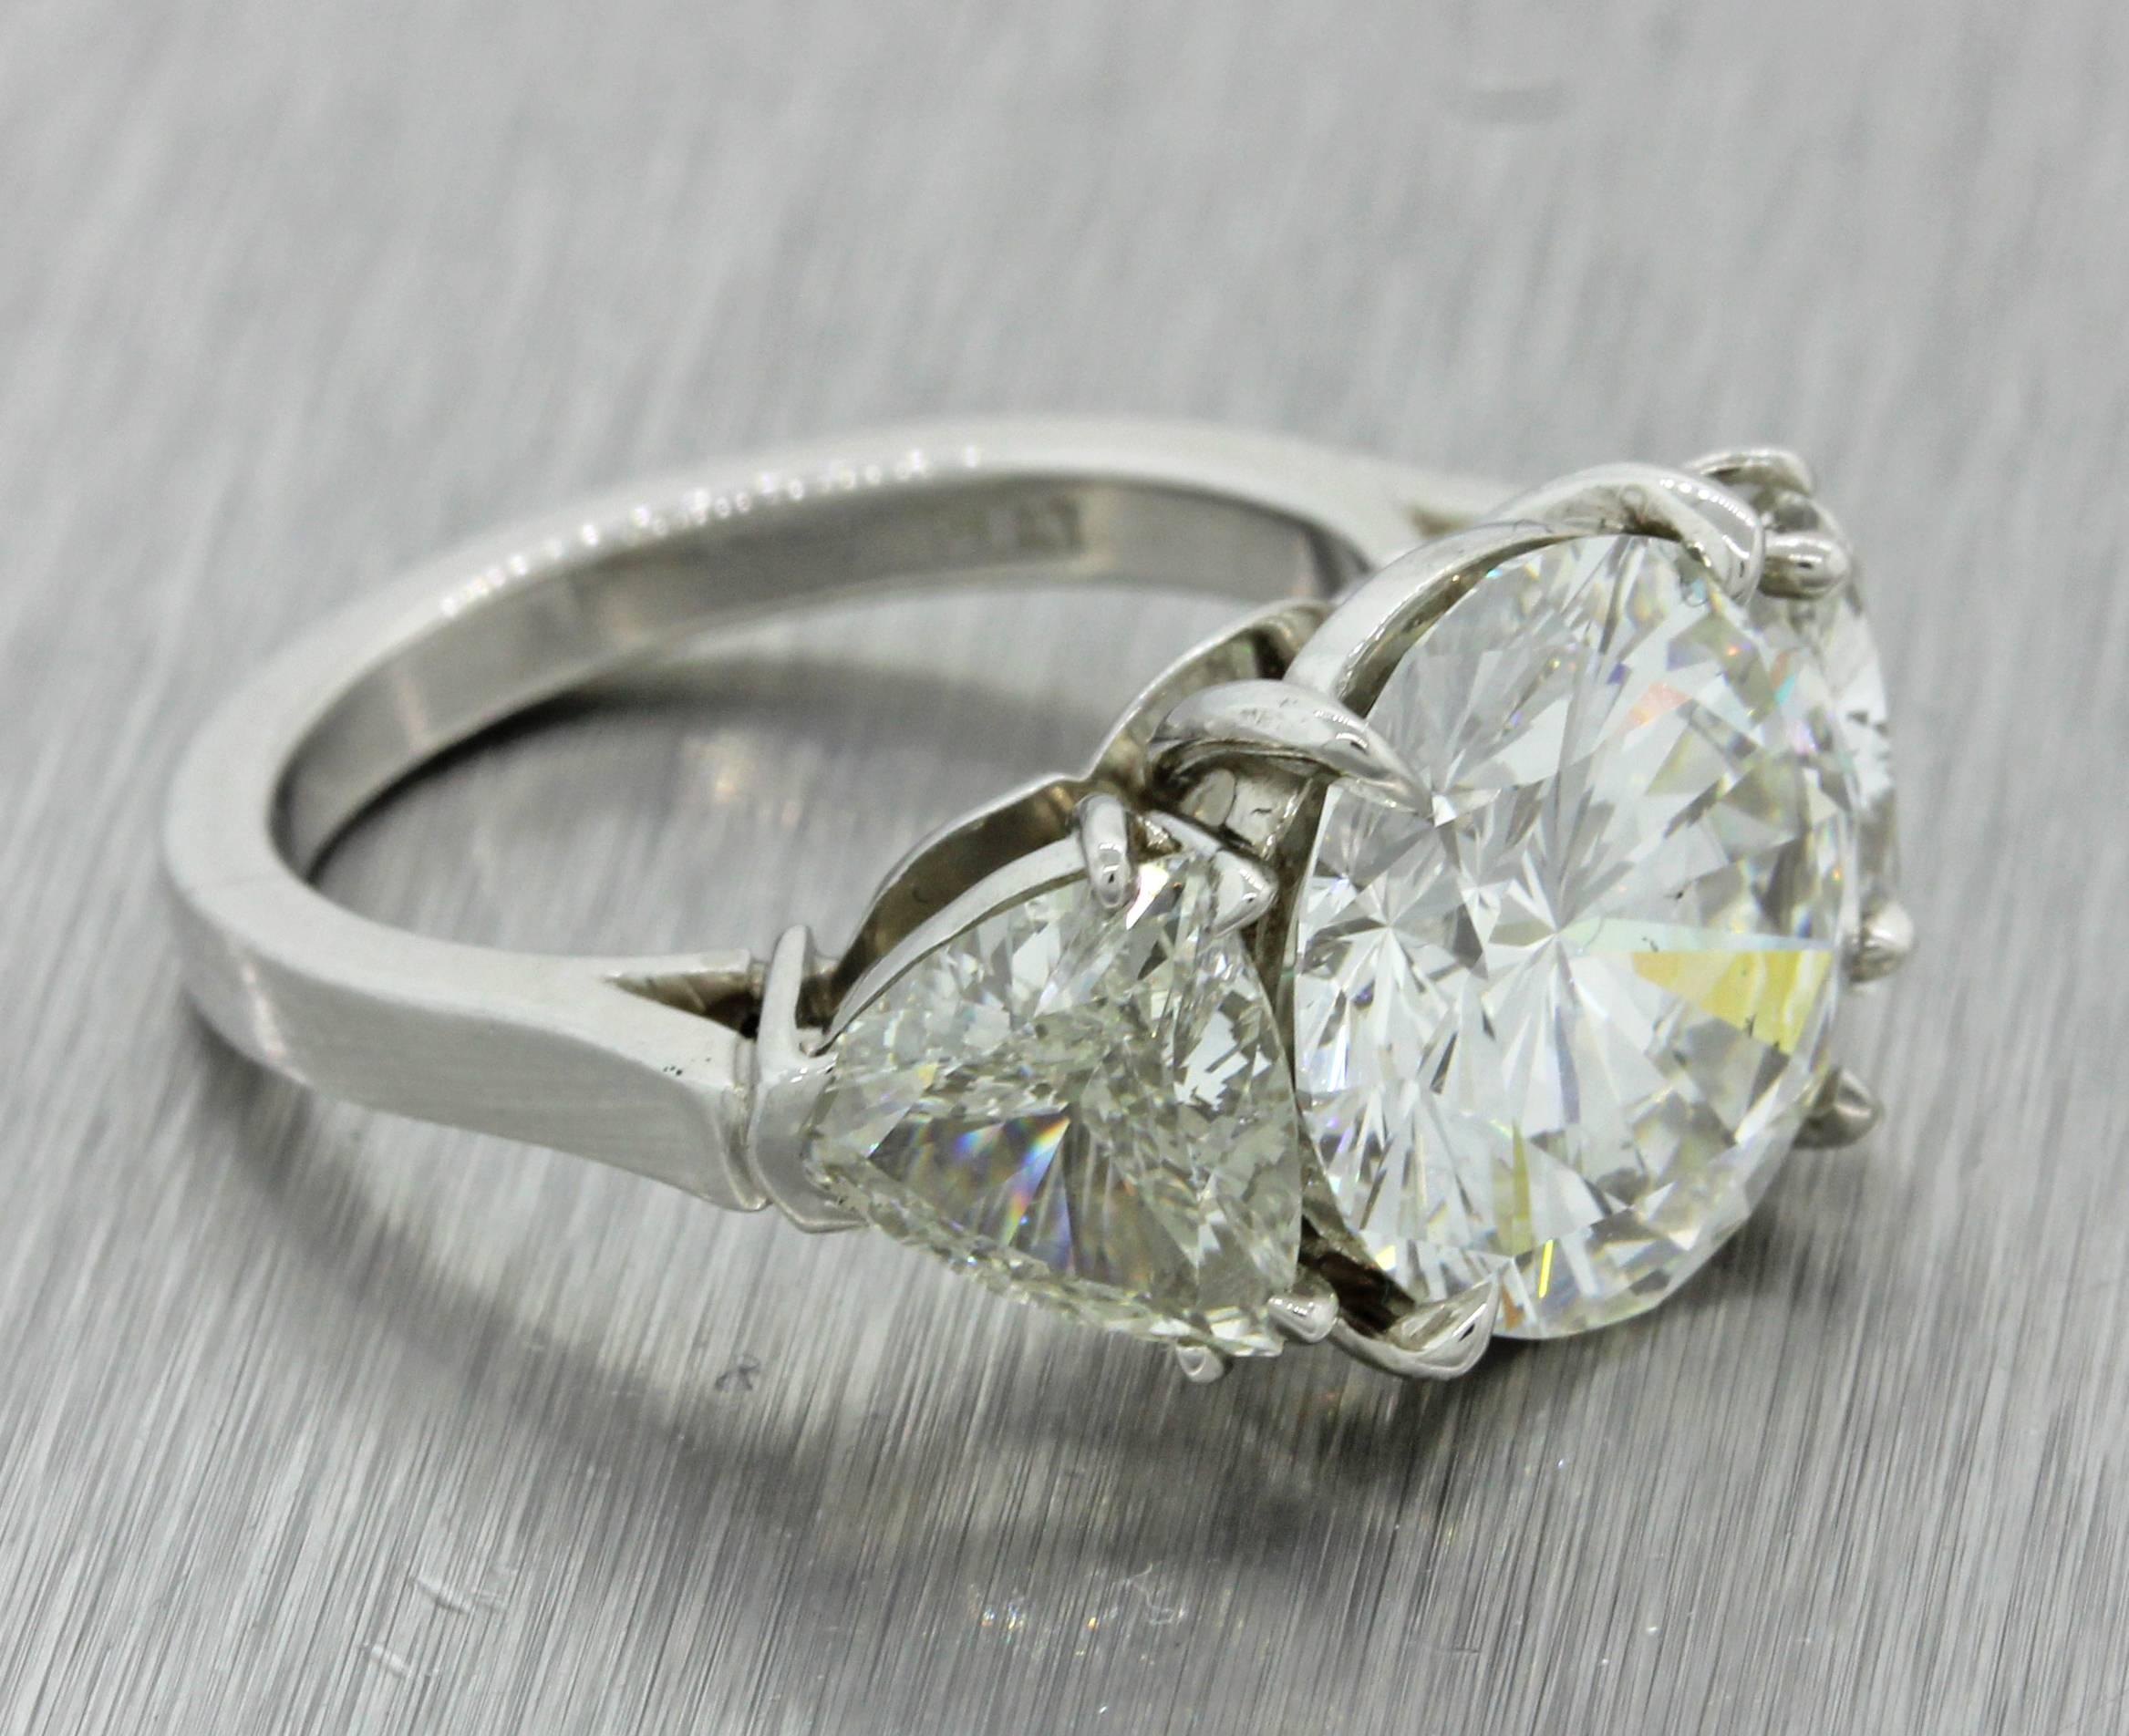 This is a gorgeous Modern Estate Platinum 7.31ctw Round Trillion Cut Three Stone GIA Diamond Engagement Ring. All 3 stones come with GIA diamond grading reports. This piece will come in a lovely ring box for a perfect presentation and our